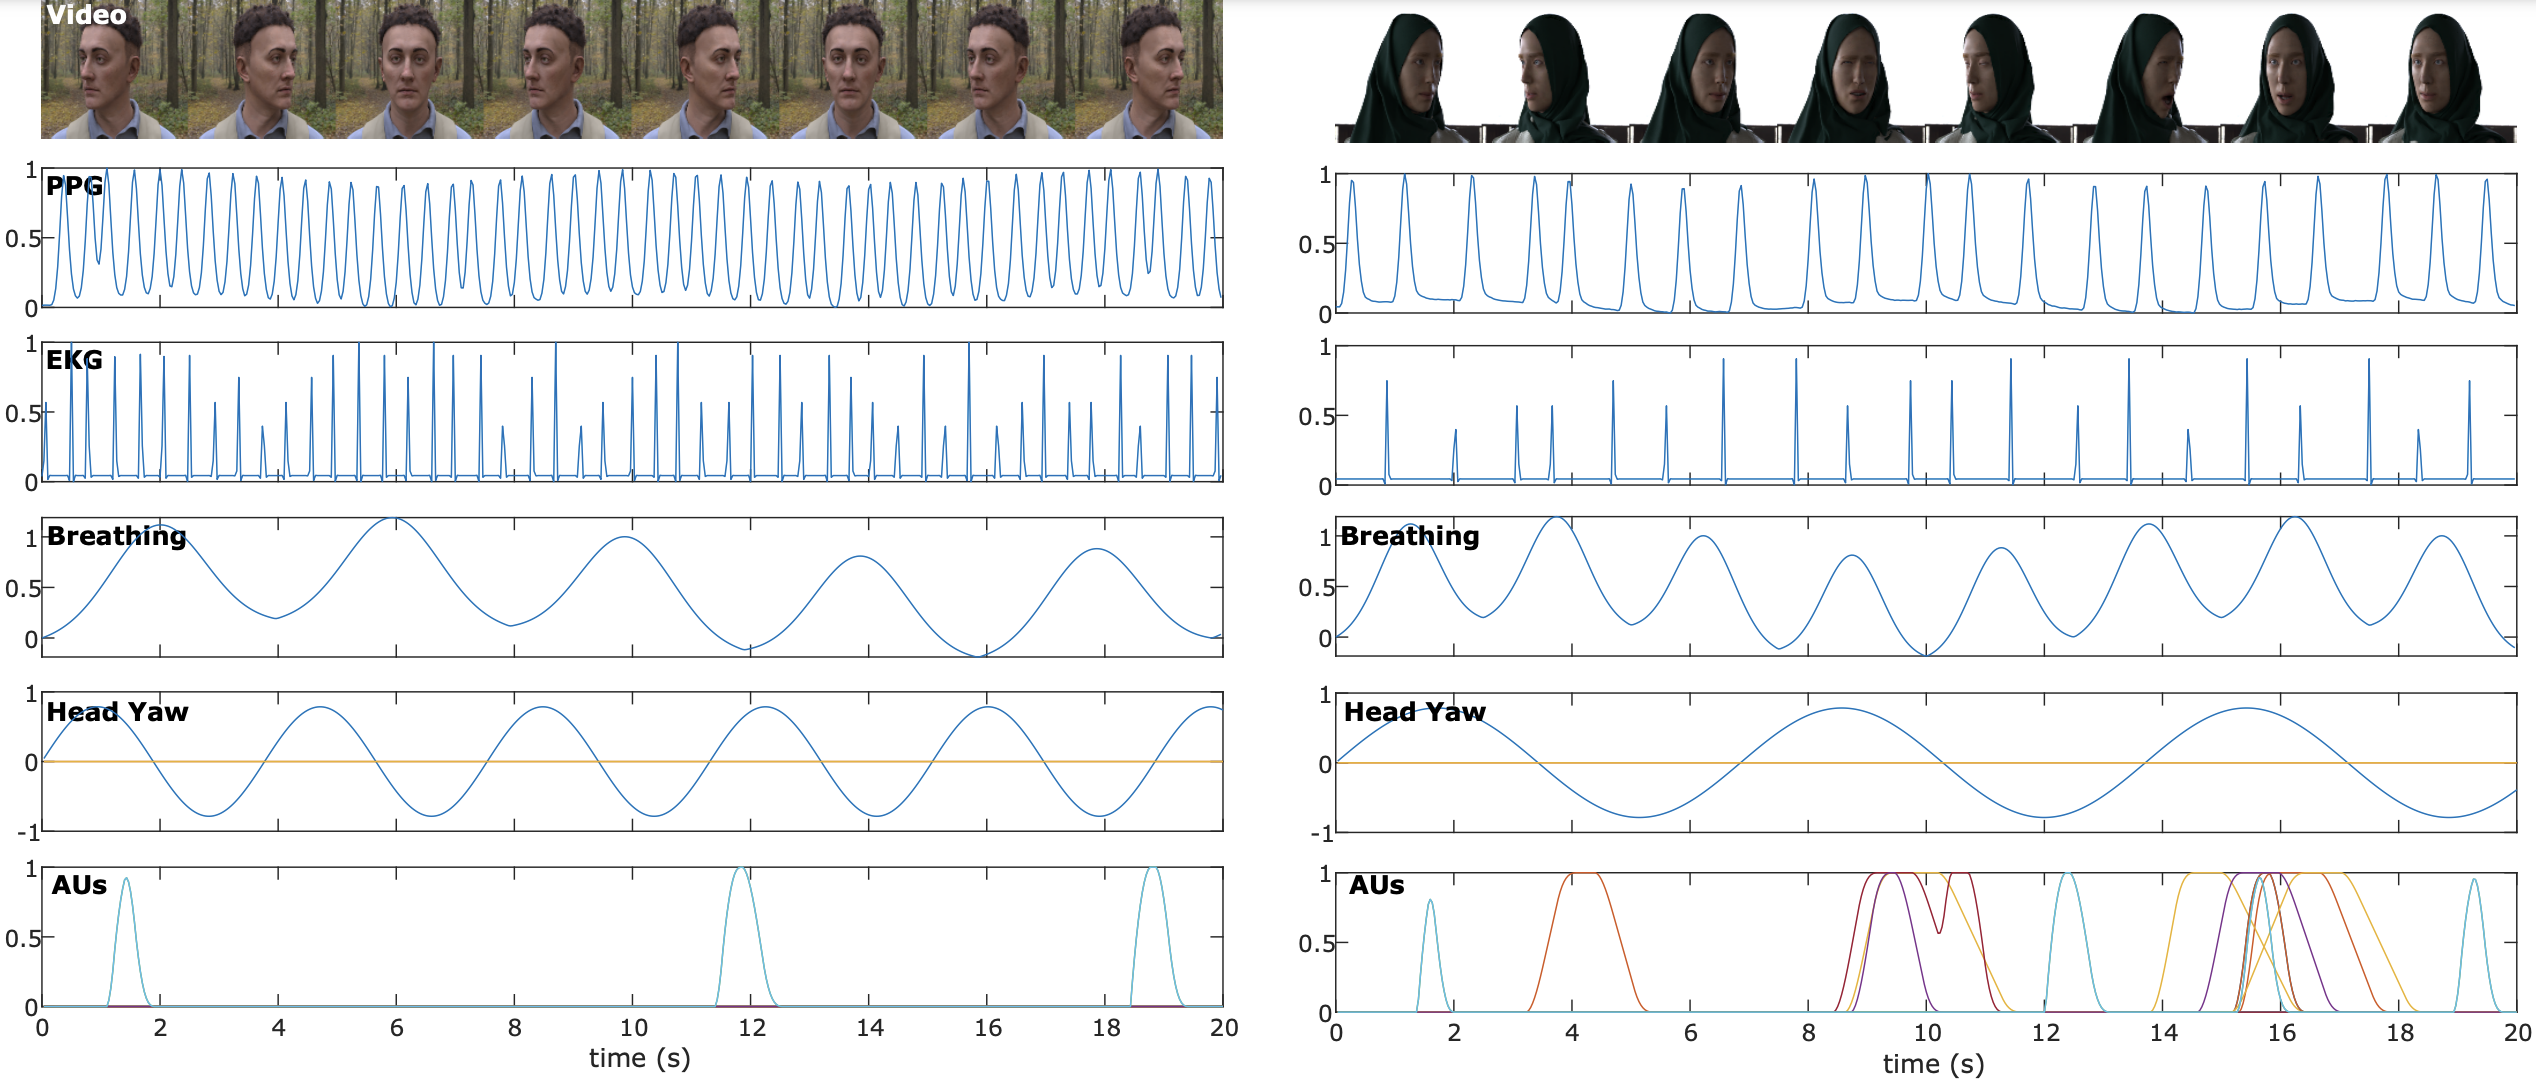 An image showing frames of a video with line graphs below it showing synchronized physiological signals